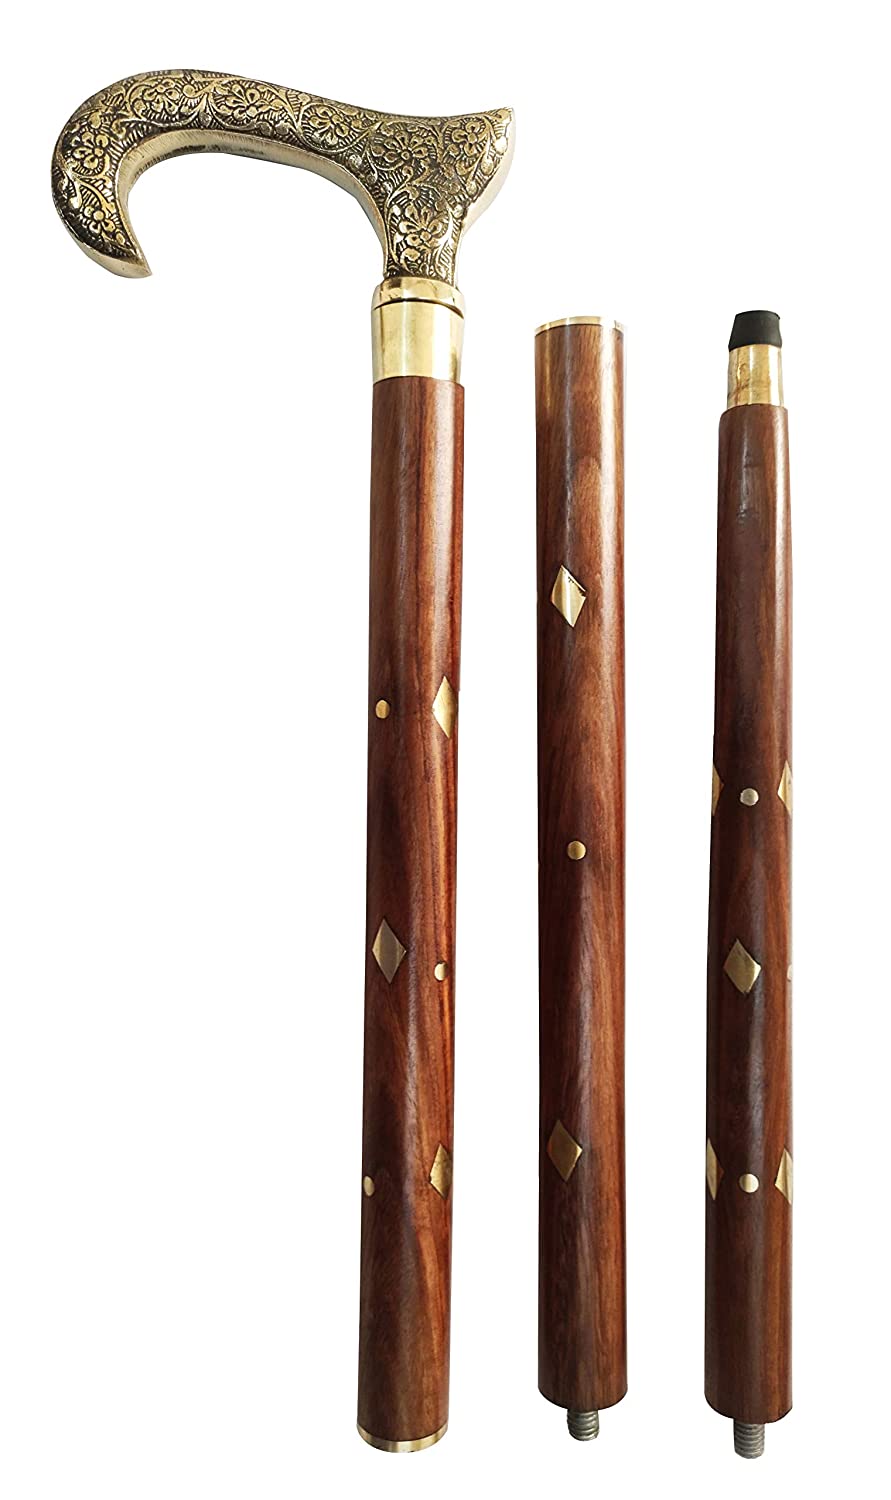 Artshai Sheesham Wood Walking Stick with Brass Handle,Gift for Old Age  People Size: 36 inch